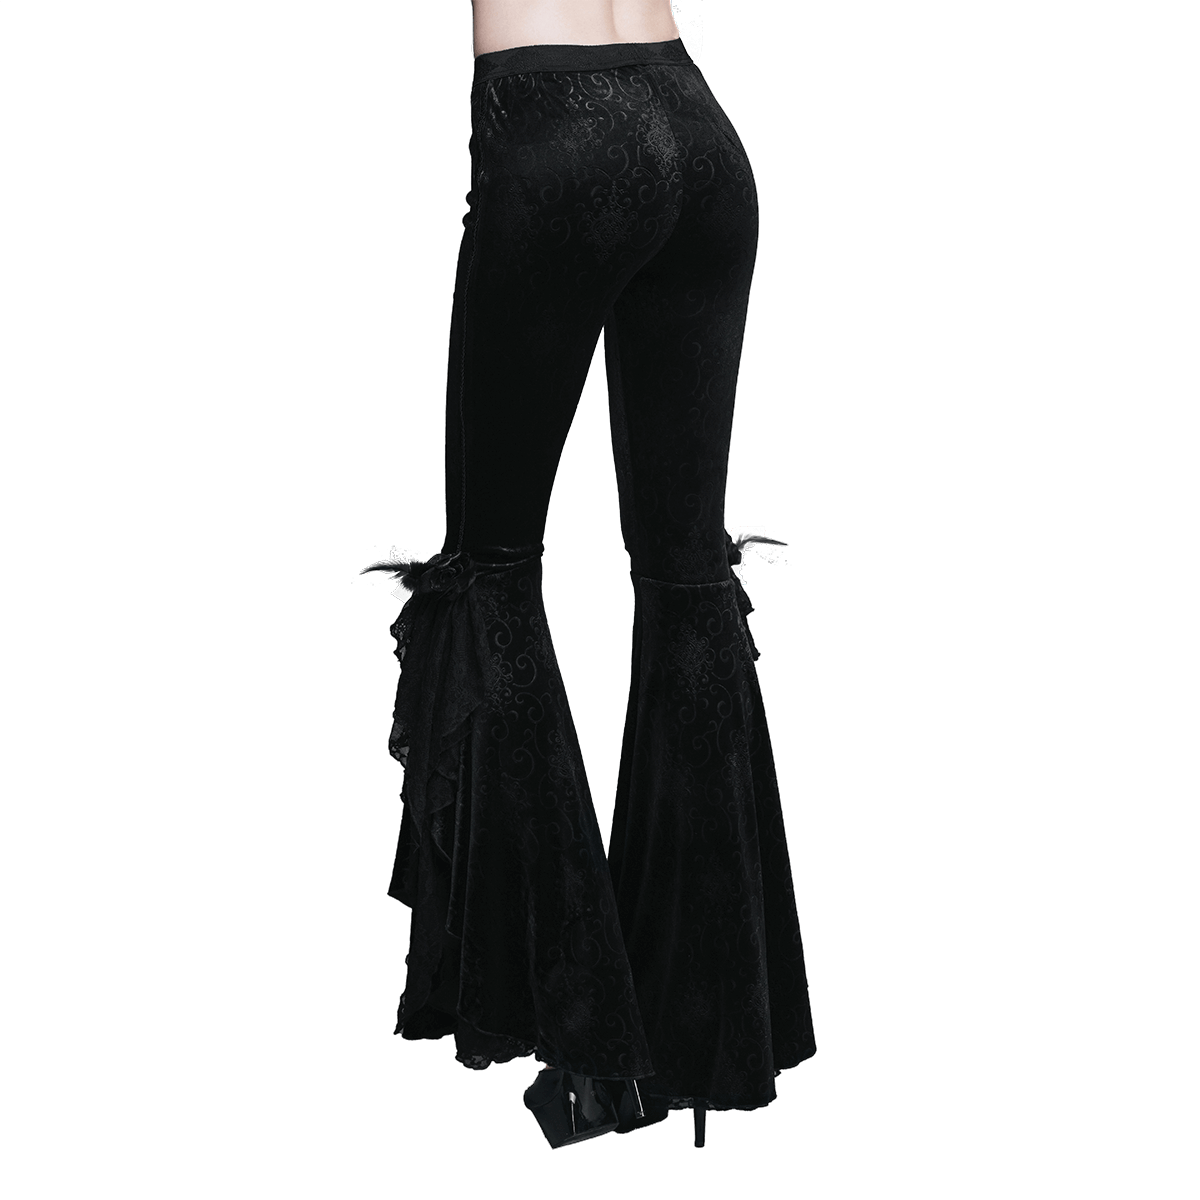 Women's Gothic Stylish Flared Trousers / Casual Black Embroidery Wide Leg Long Pants - HARD'N'HEAVY